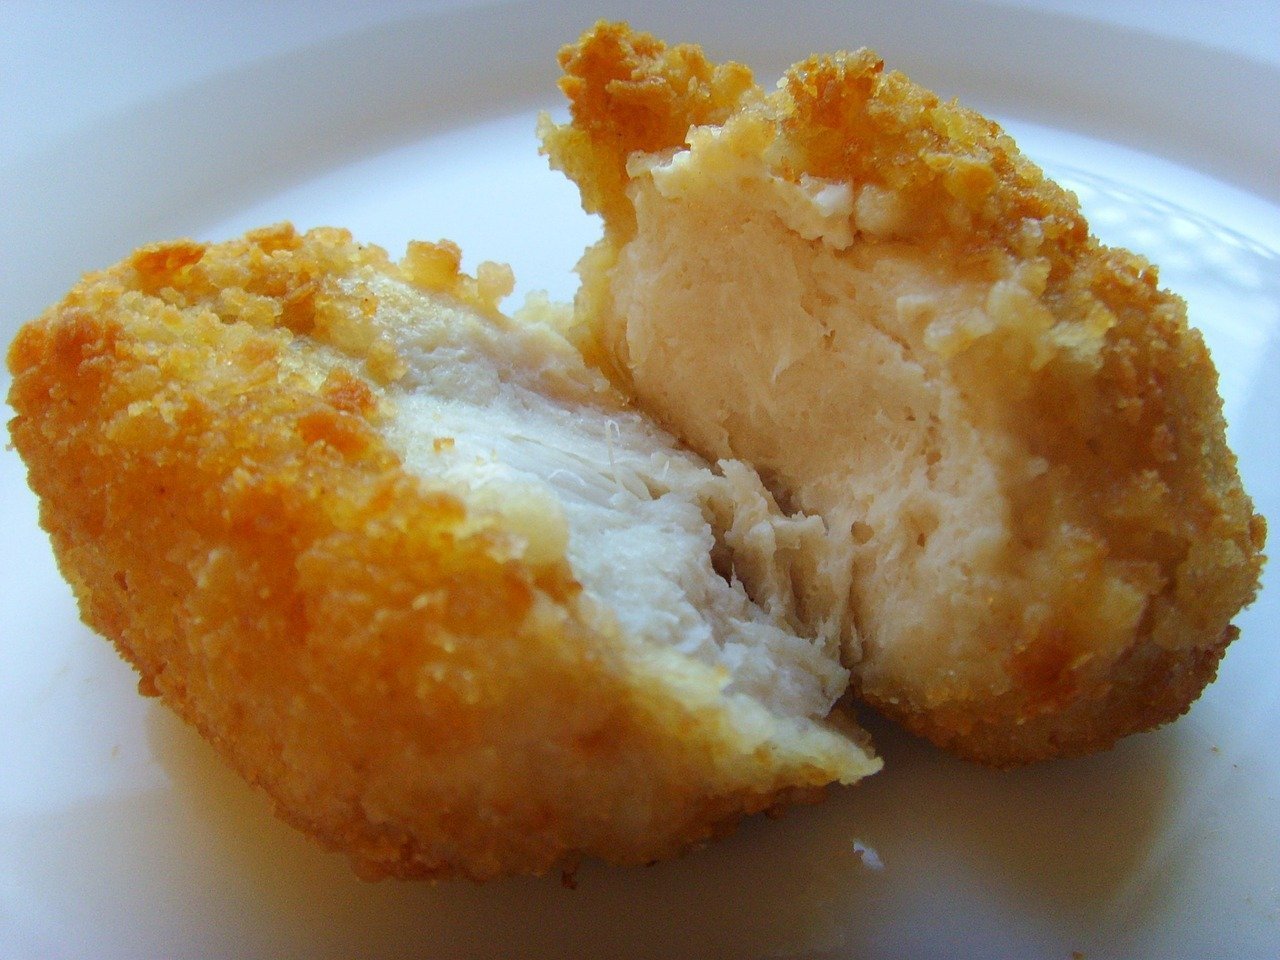 A batch of chicken nuggets. Image credit: Pixabay